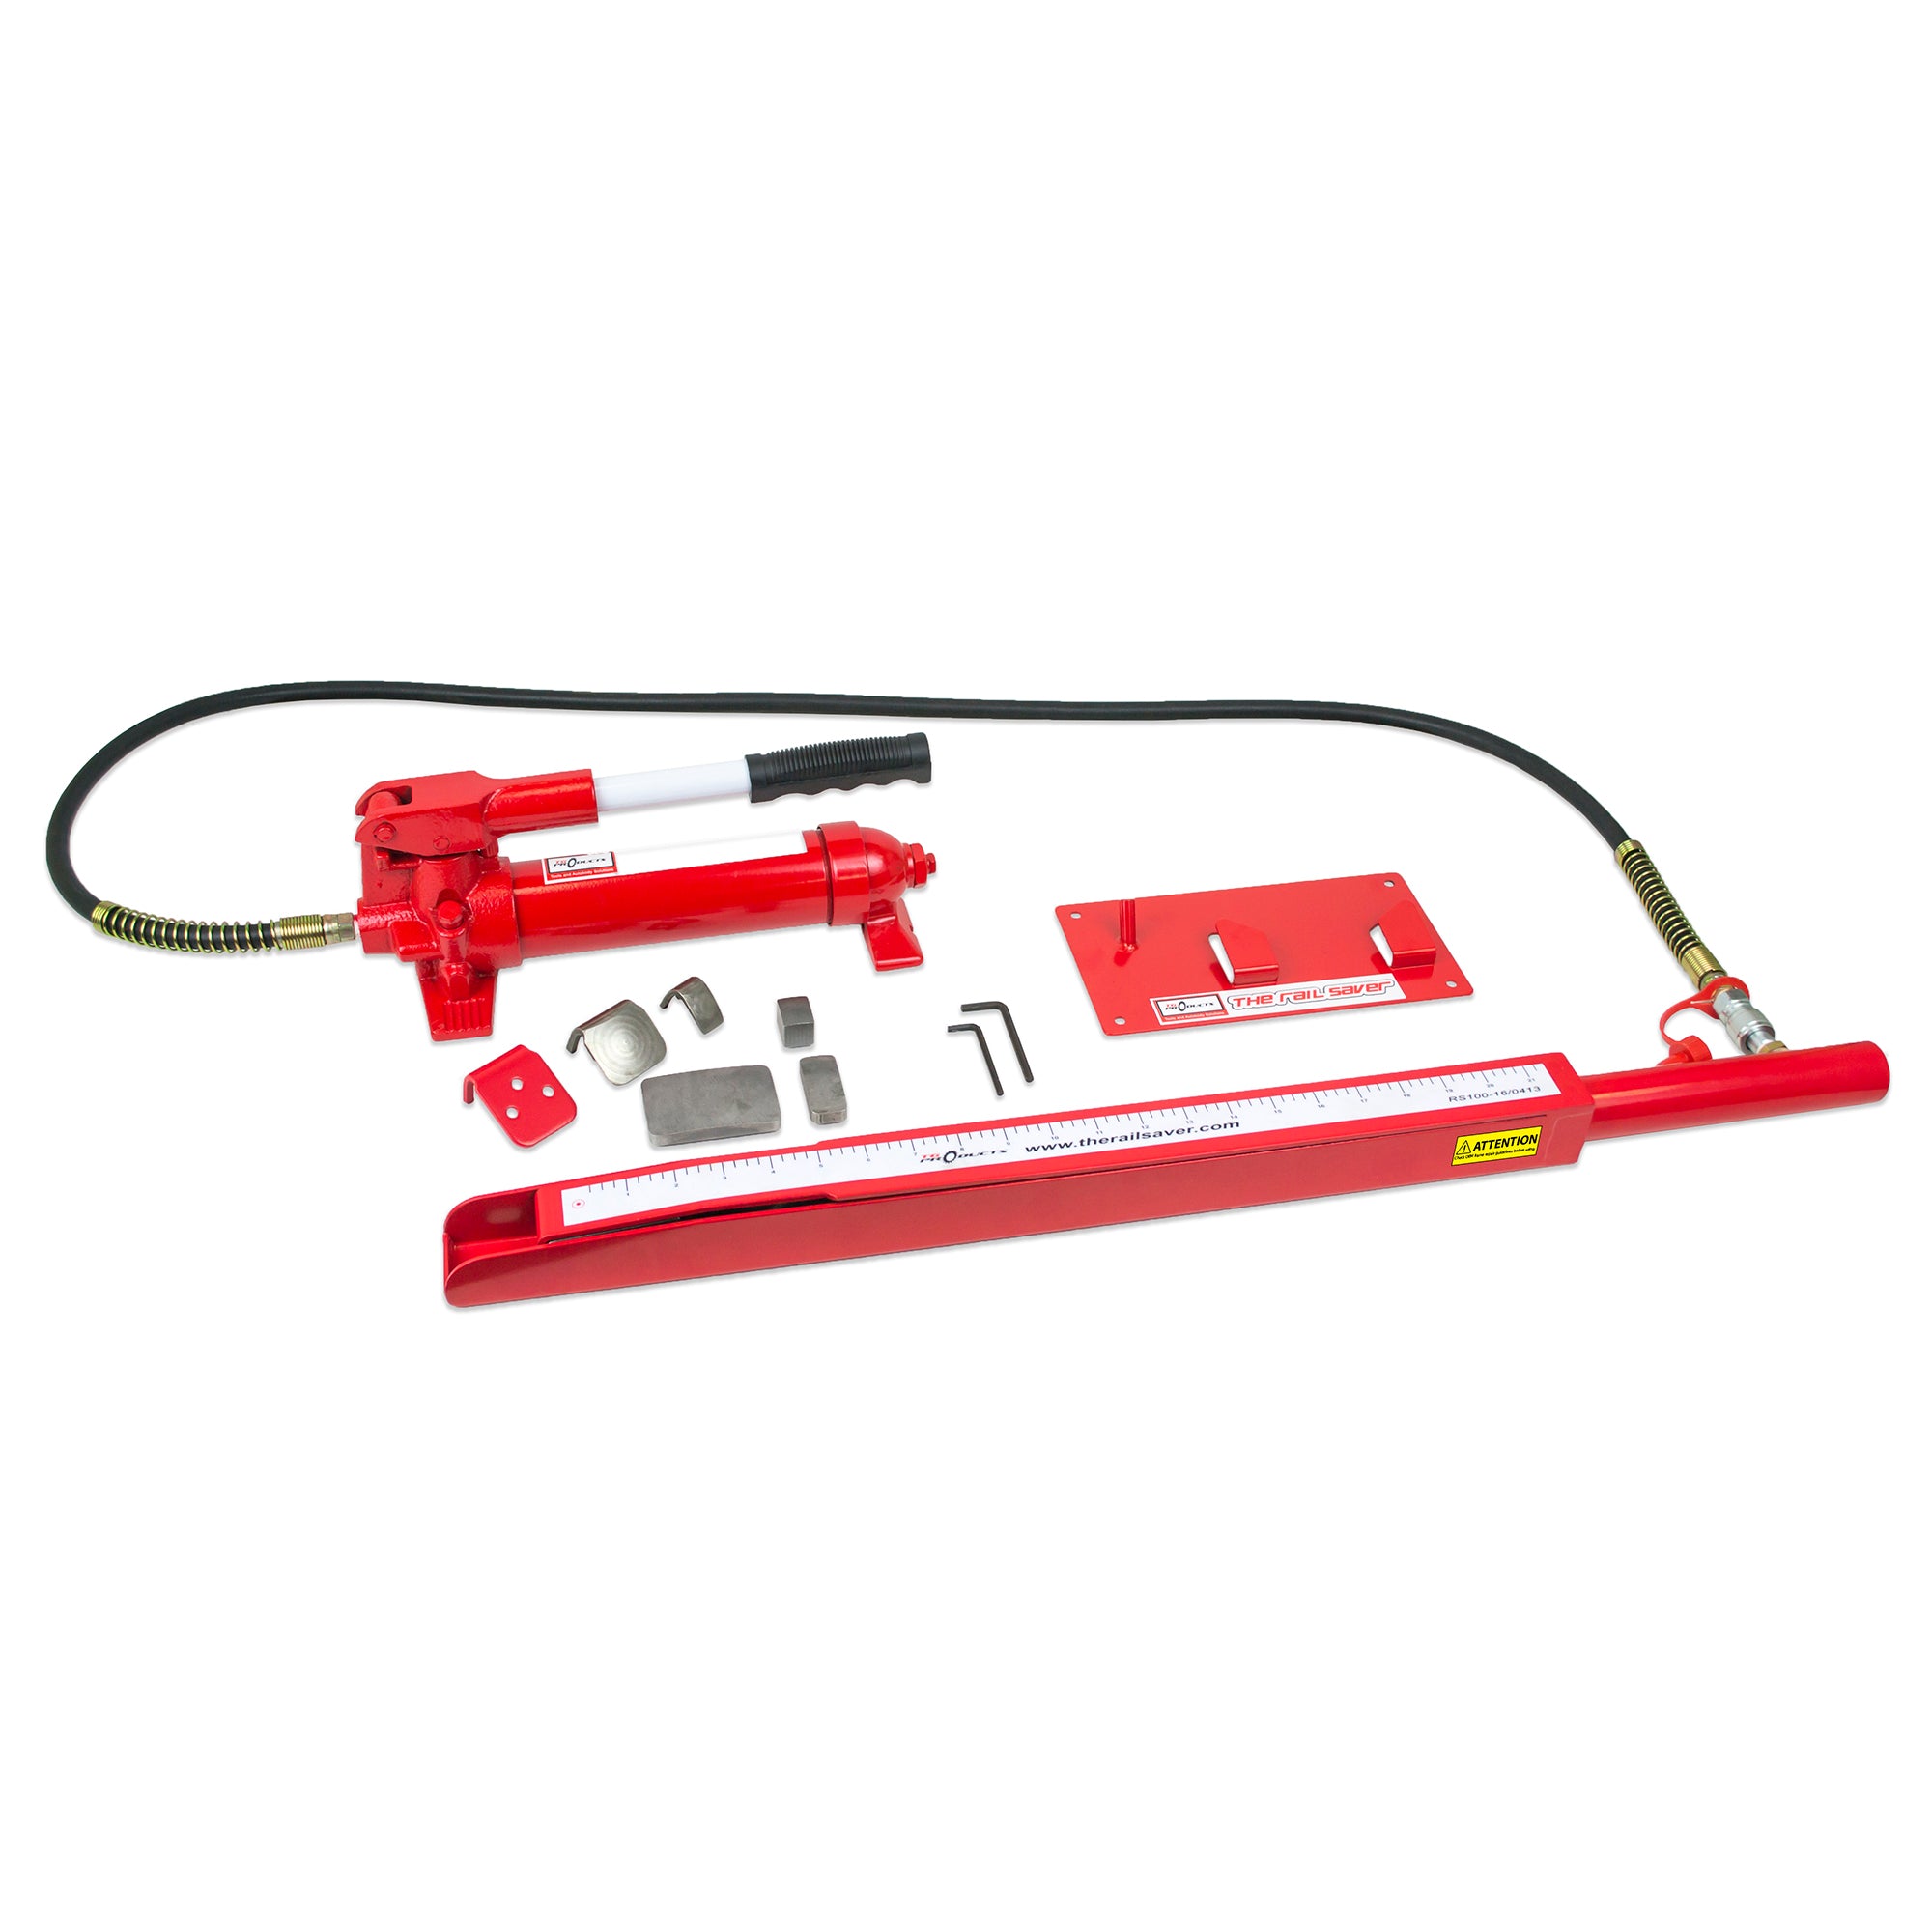 The Rail Saver Repair System, Accessory Kit, Ram, Case and Wall Bracket (With Pump)